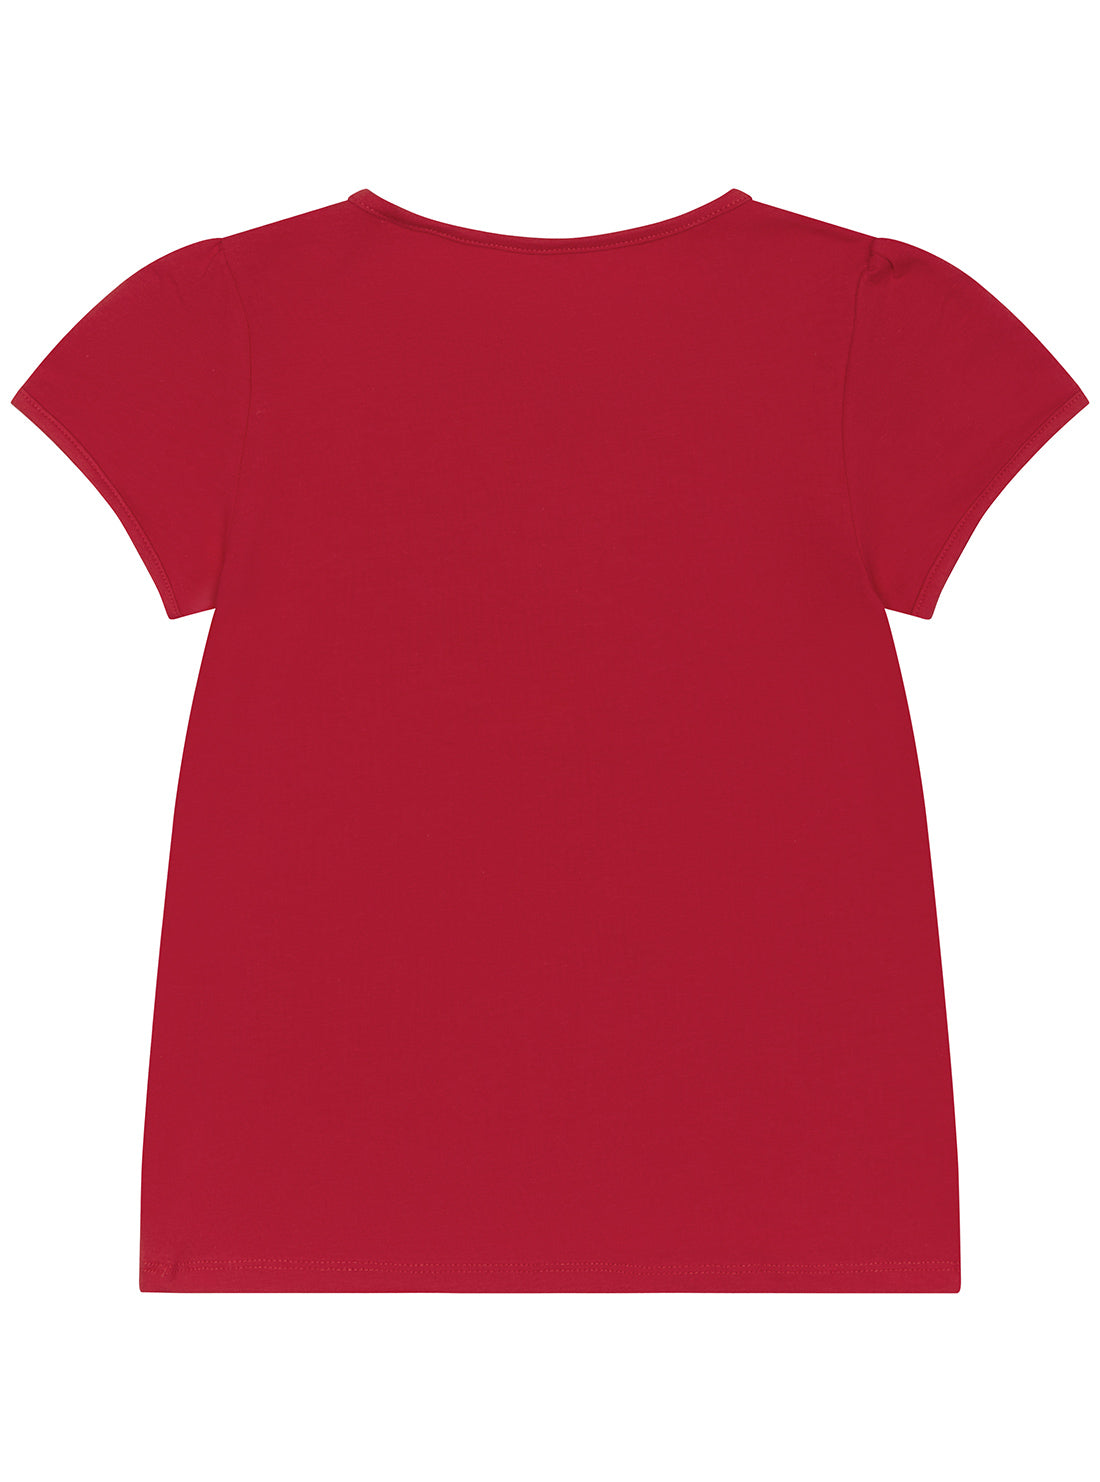 GUESS Red Short Sleeve T-Shirt (2-7) back view